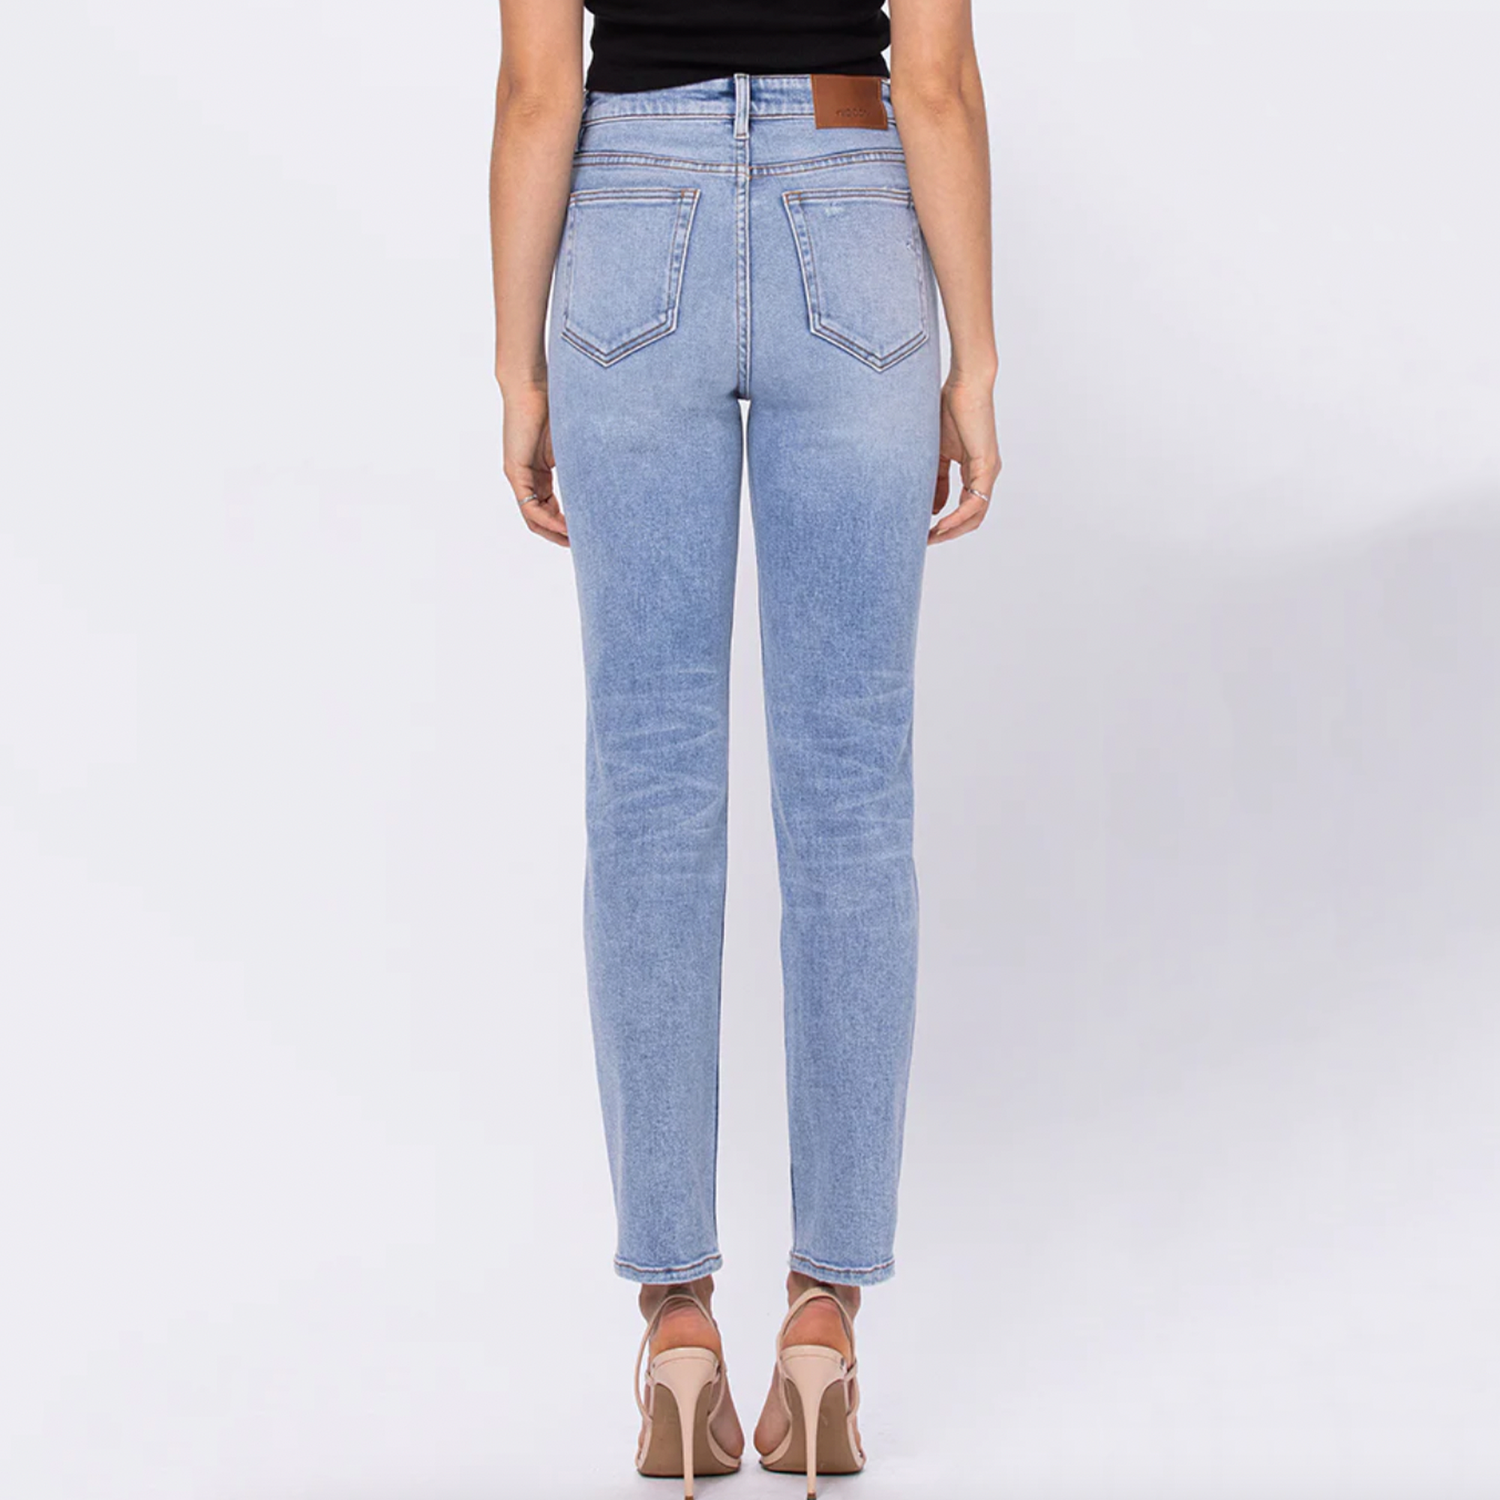 Hidden Zoey Basic Mom Jeans. The jeans everyone is crazy for! A light wash slight distressed denim with button and zipper closet, functioning front and back pockets. Wear these with any tee, sweater, sweatshirt, for an everyday look